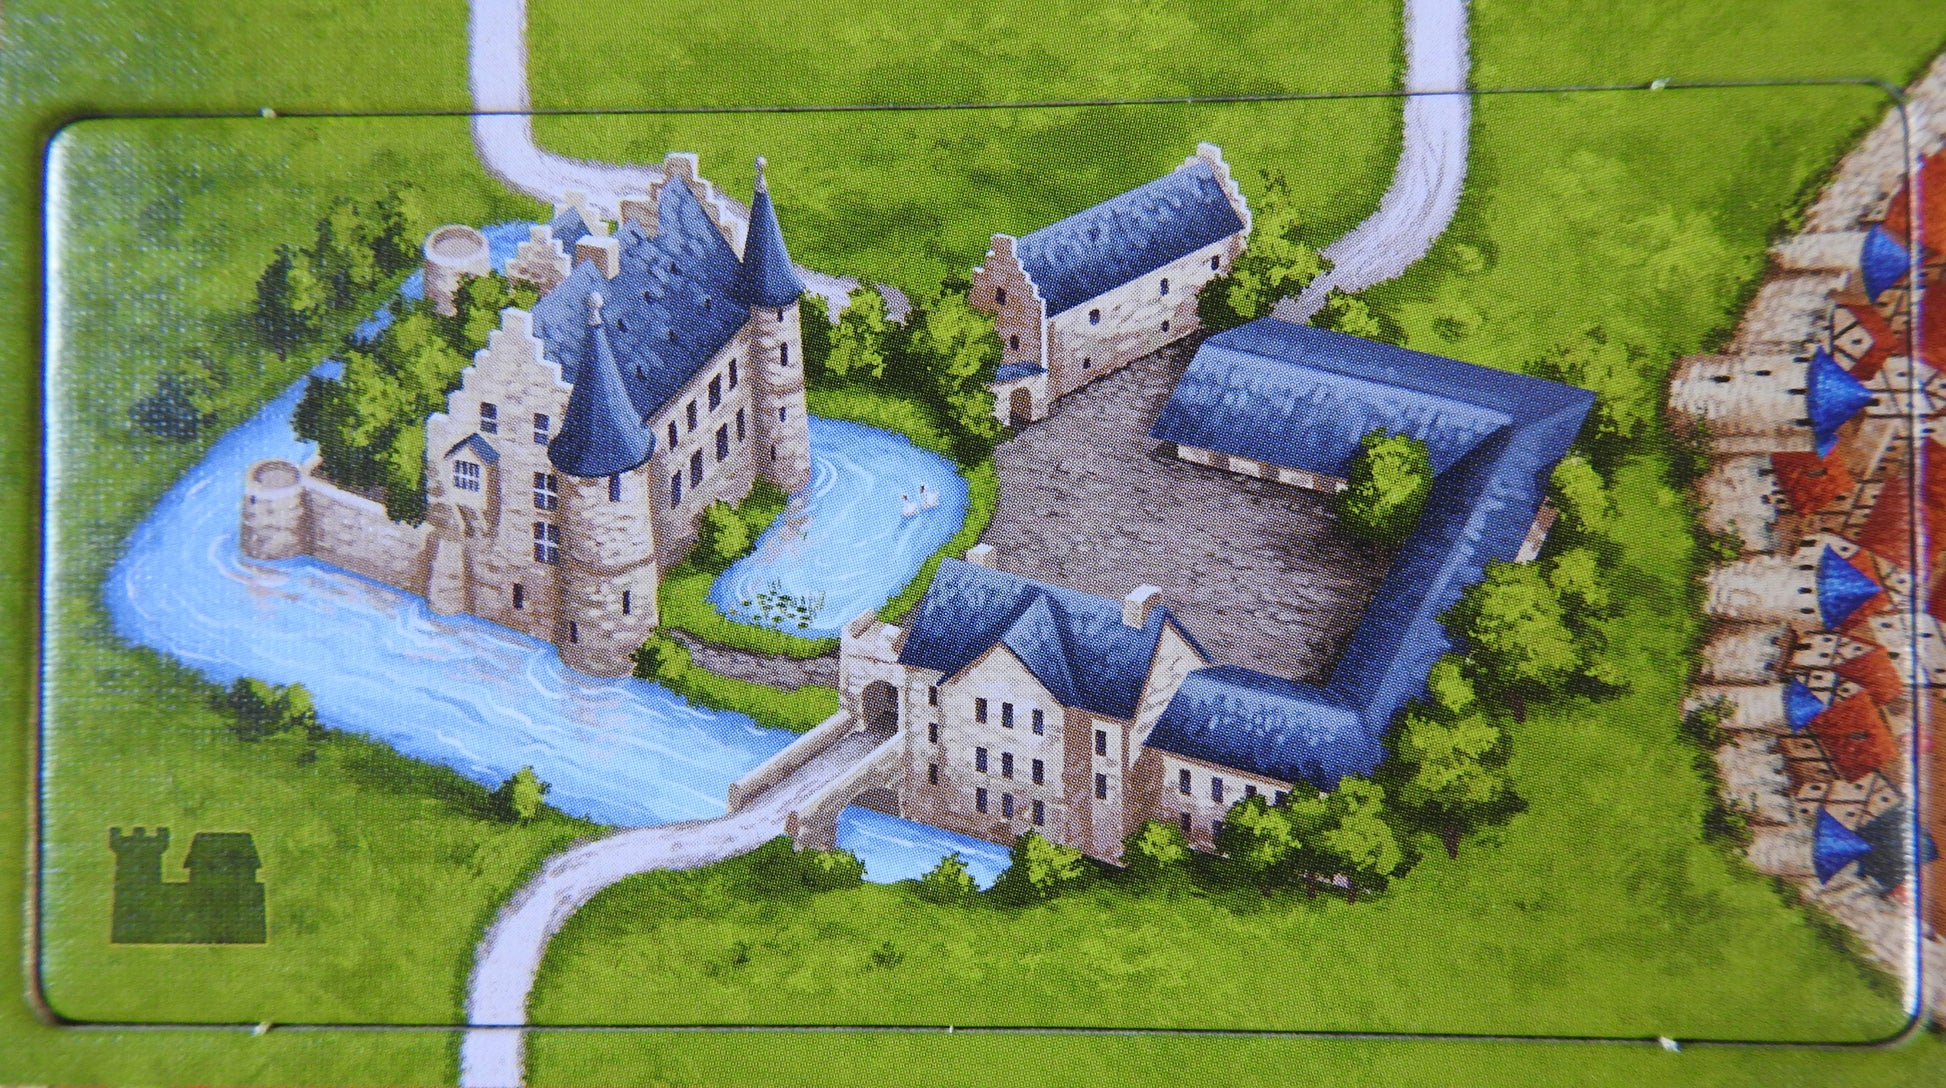 A further castle with a moat surrounding it in this German Castles mini expansion for Carcassonne.